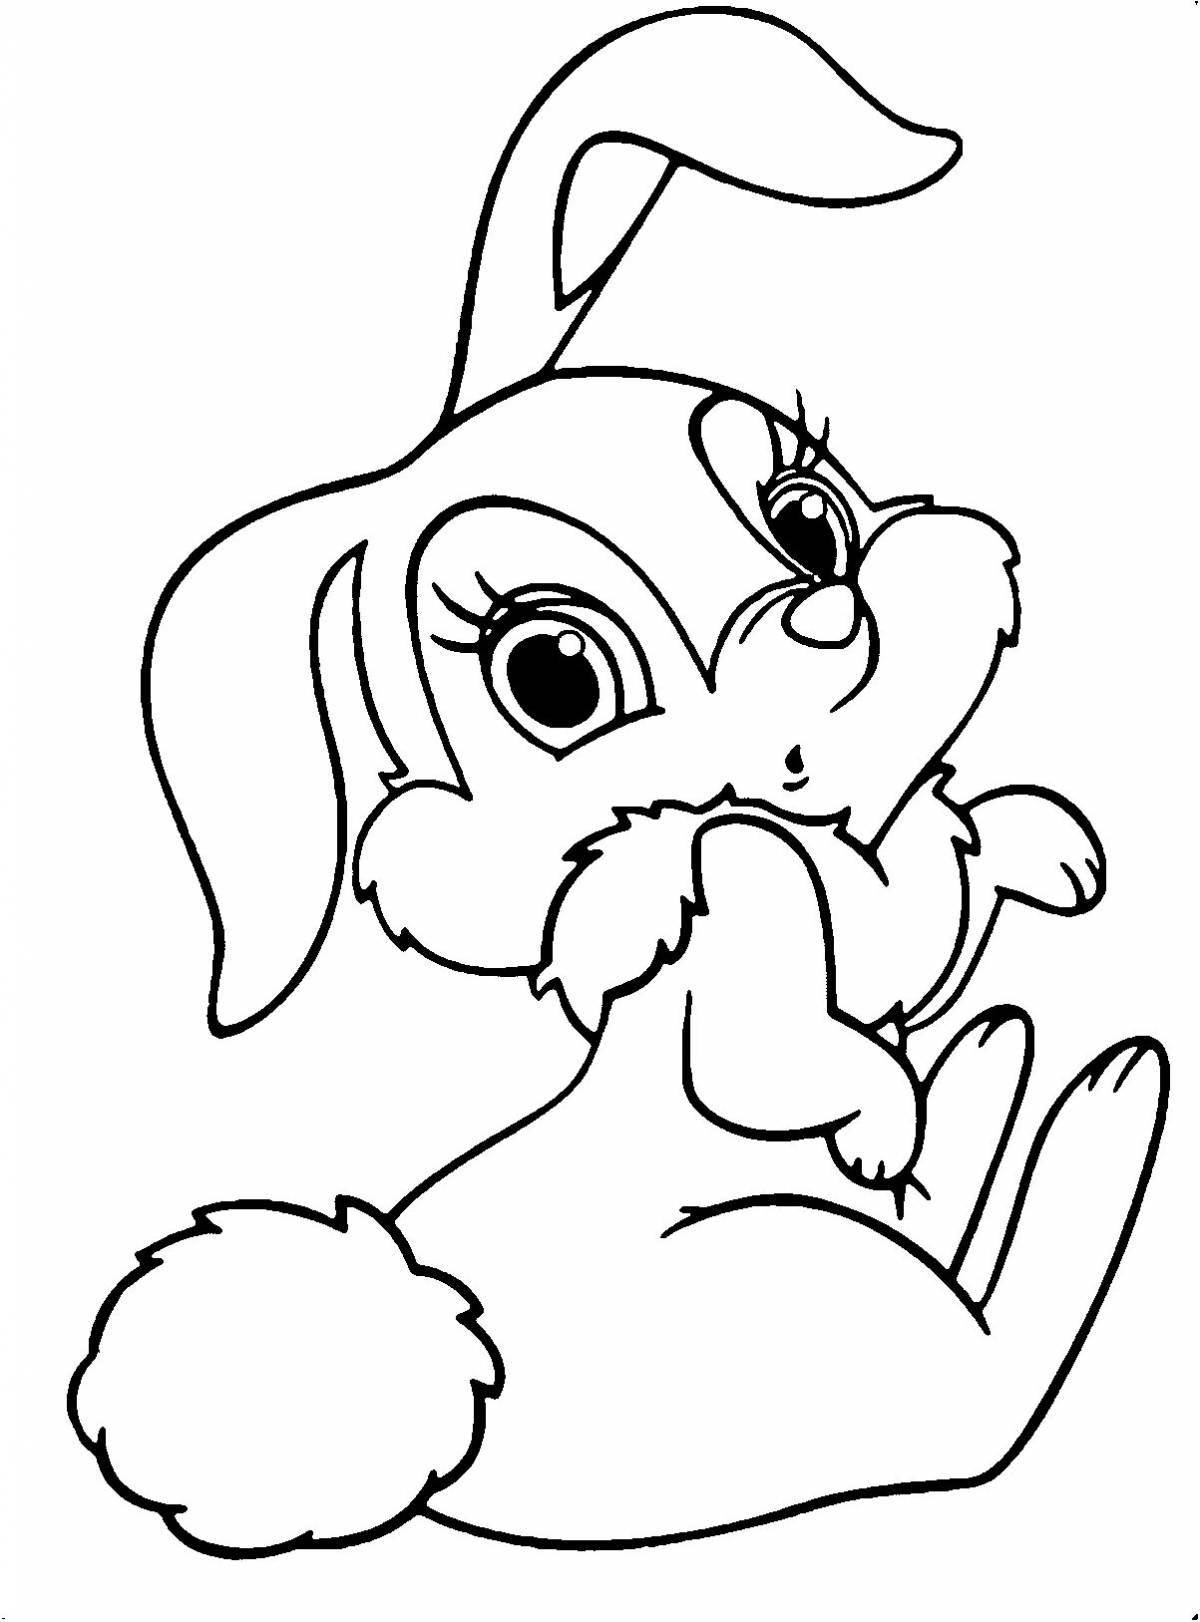 Gorgeous rabbit and cat coloring book